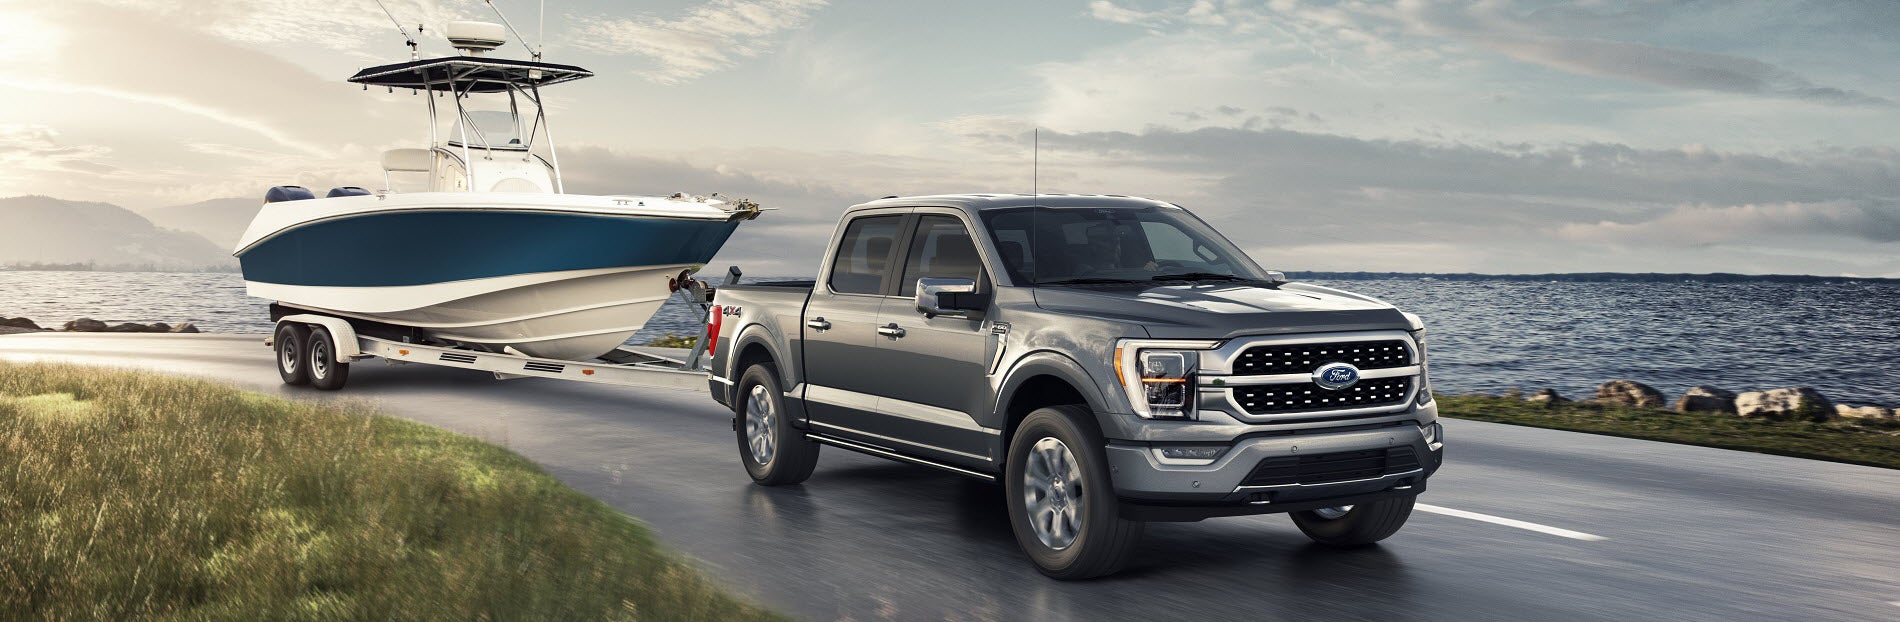 2021 Ford F-150 Towing Capacity | Fremont Motor Company Wyoming 2021 Ford F 150 3.3 V6 Towing Capacity